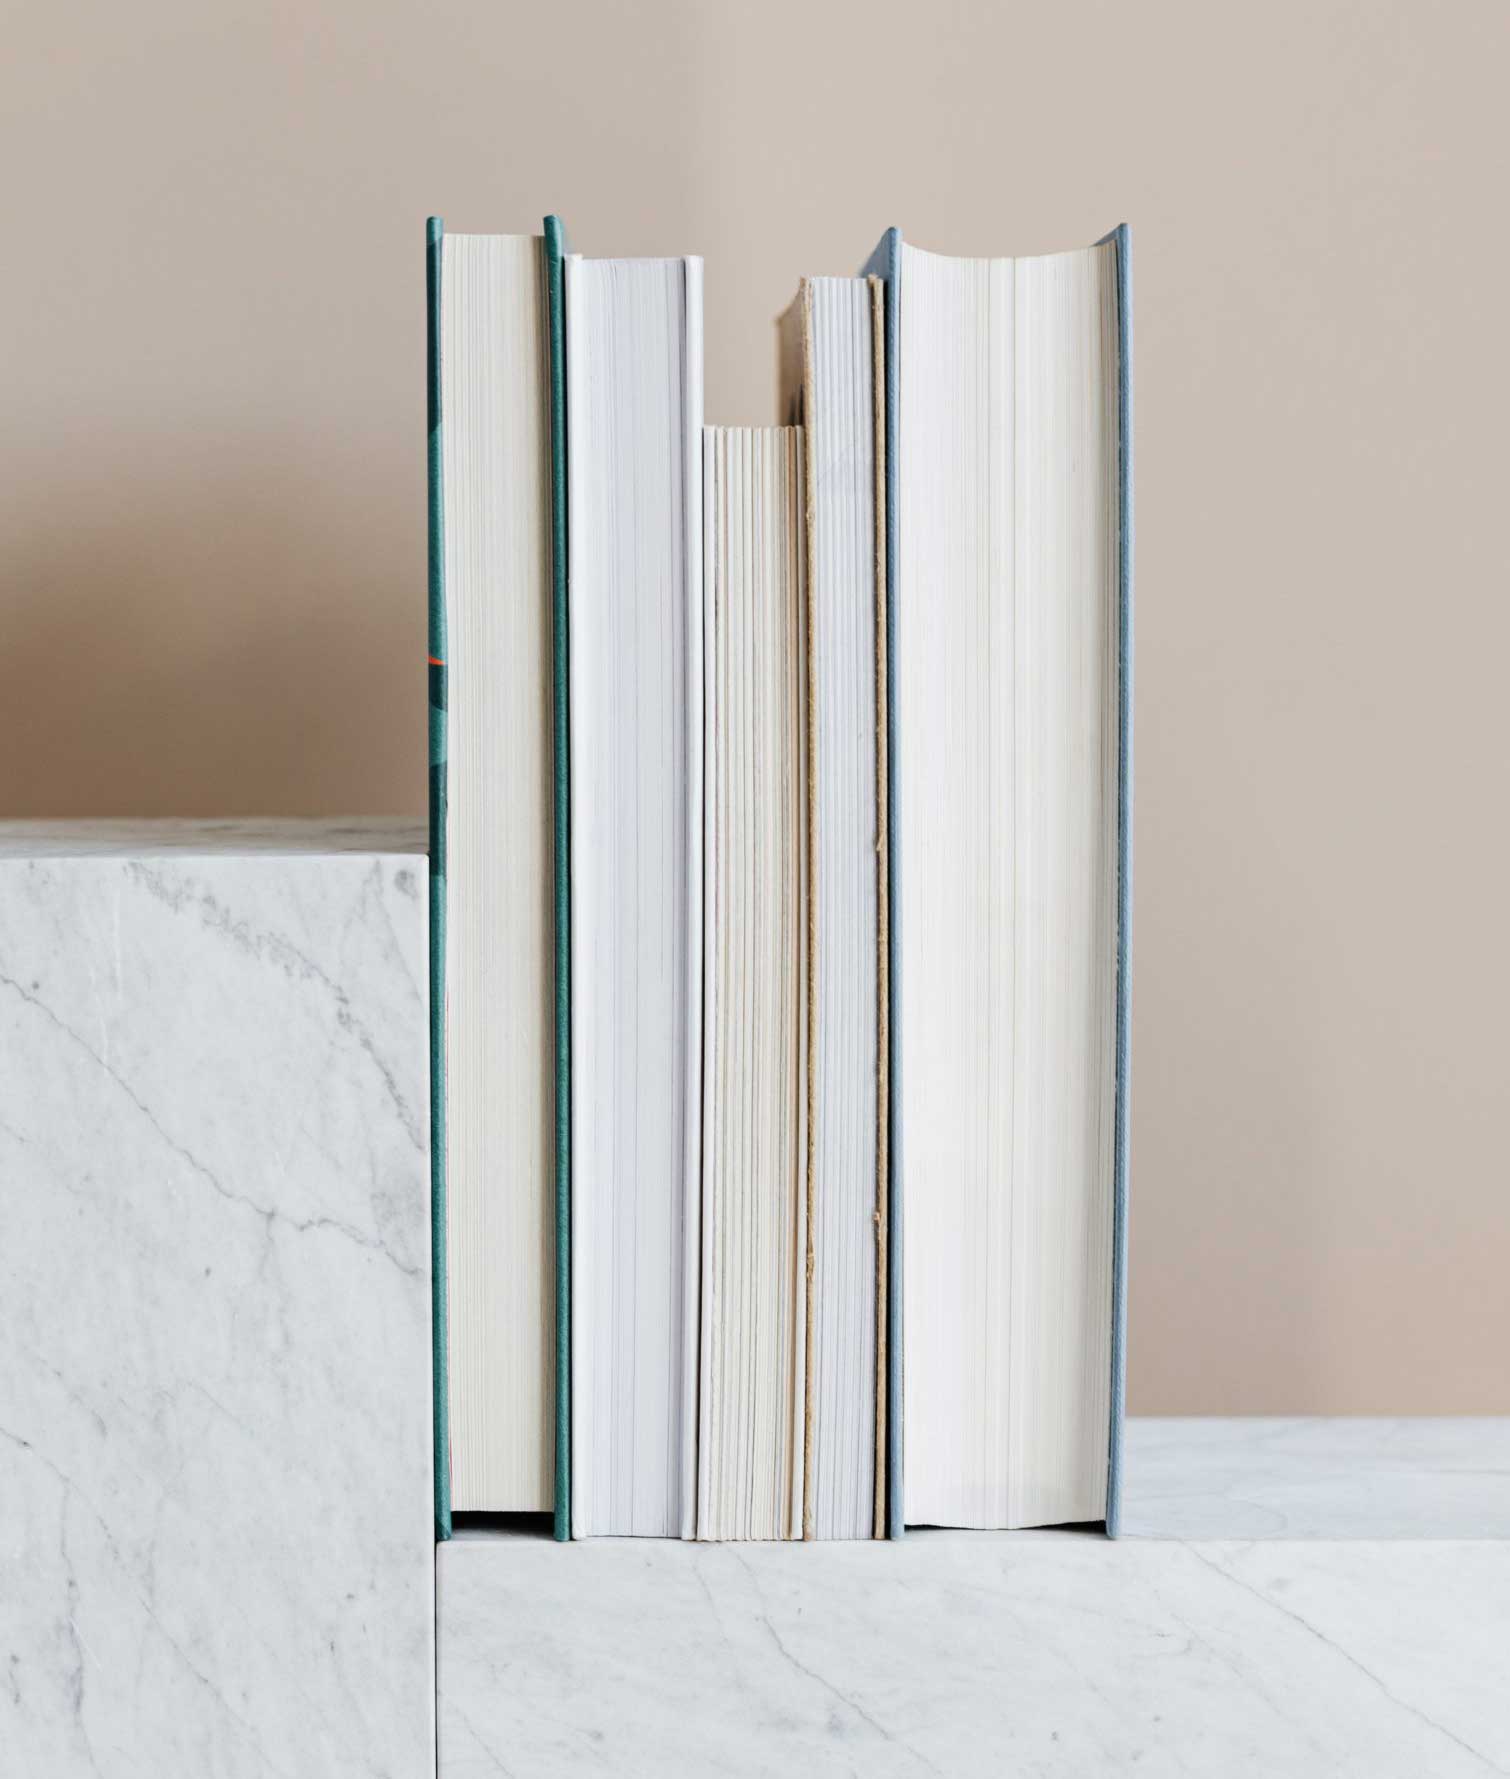 five books lined up on marble shelf